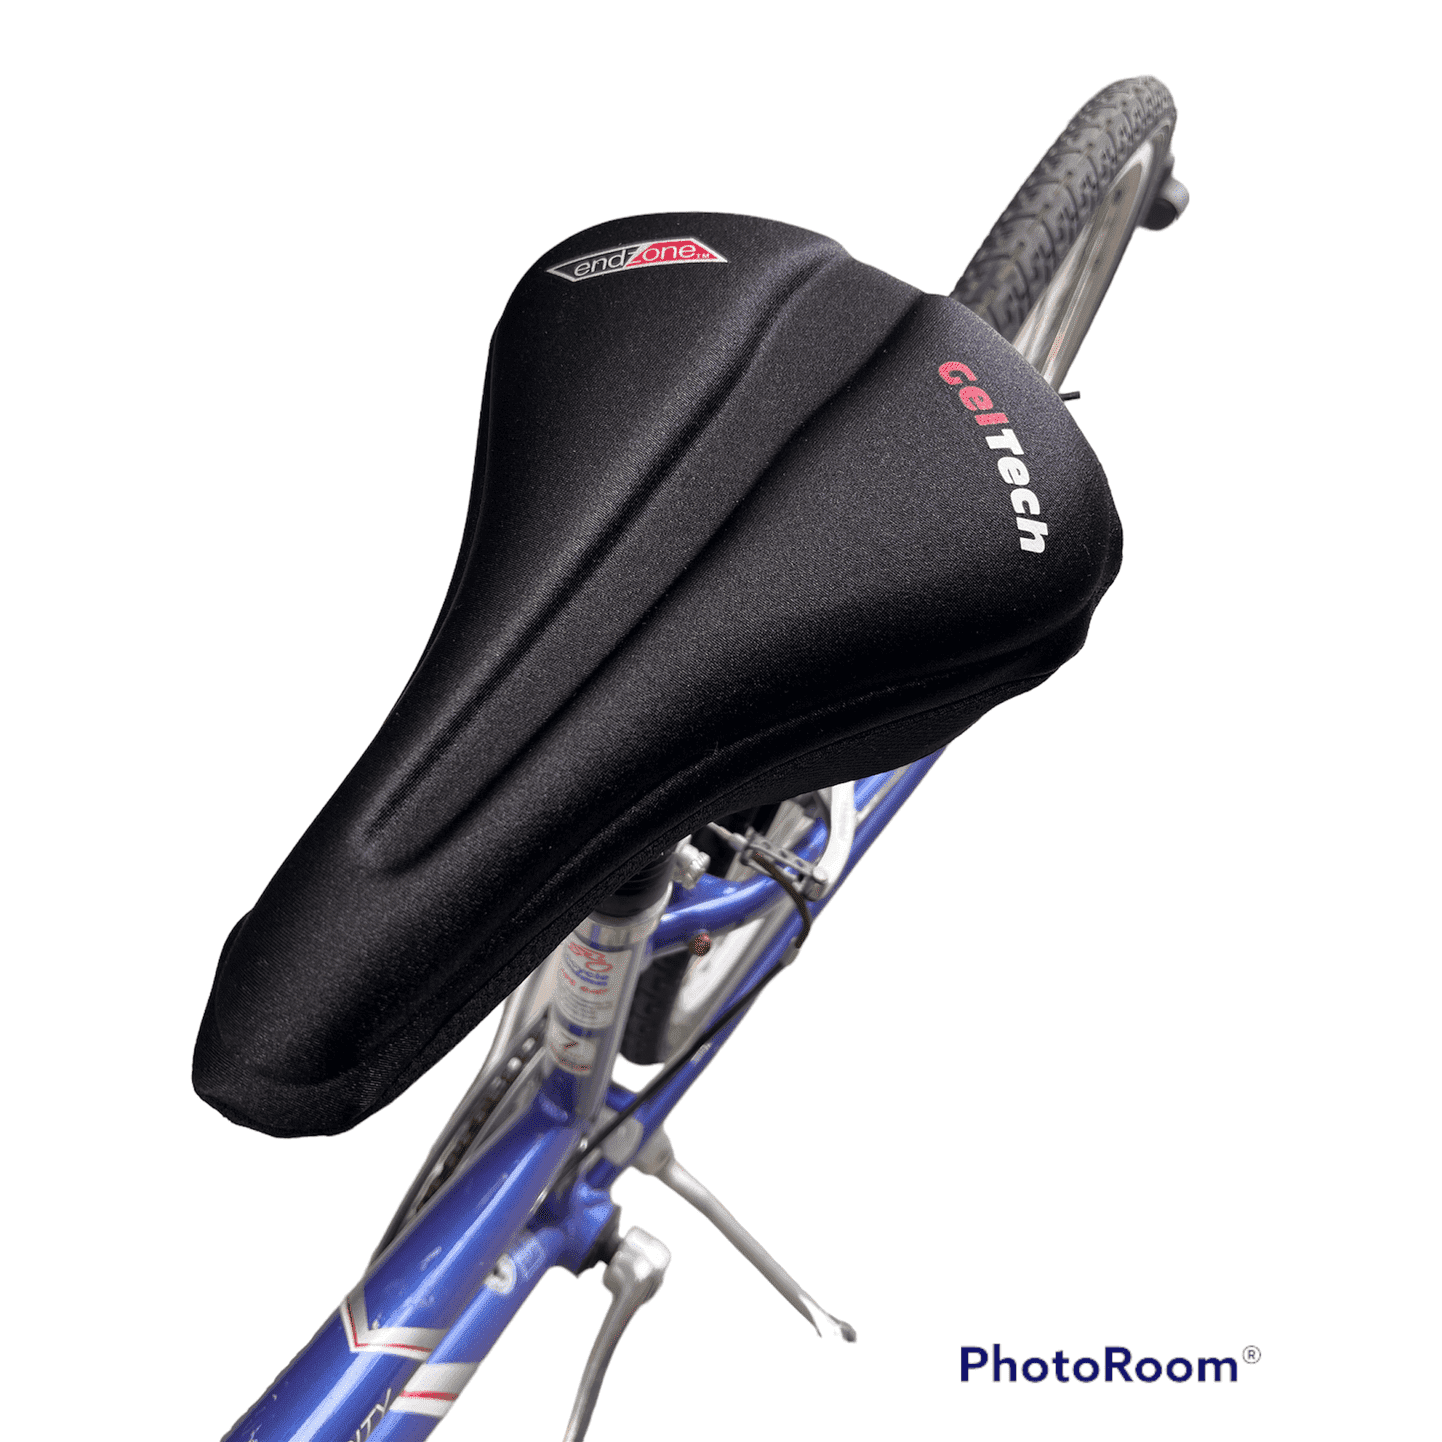 COUVRE SELLE VELO BTWIN 